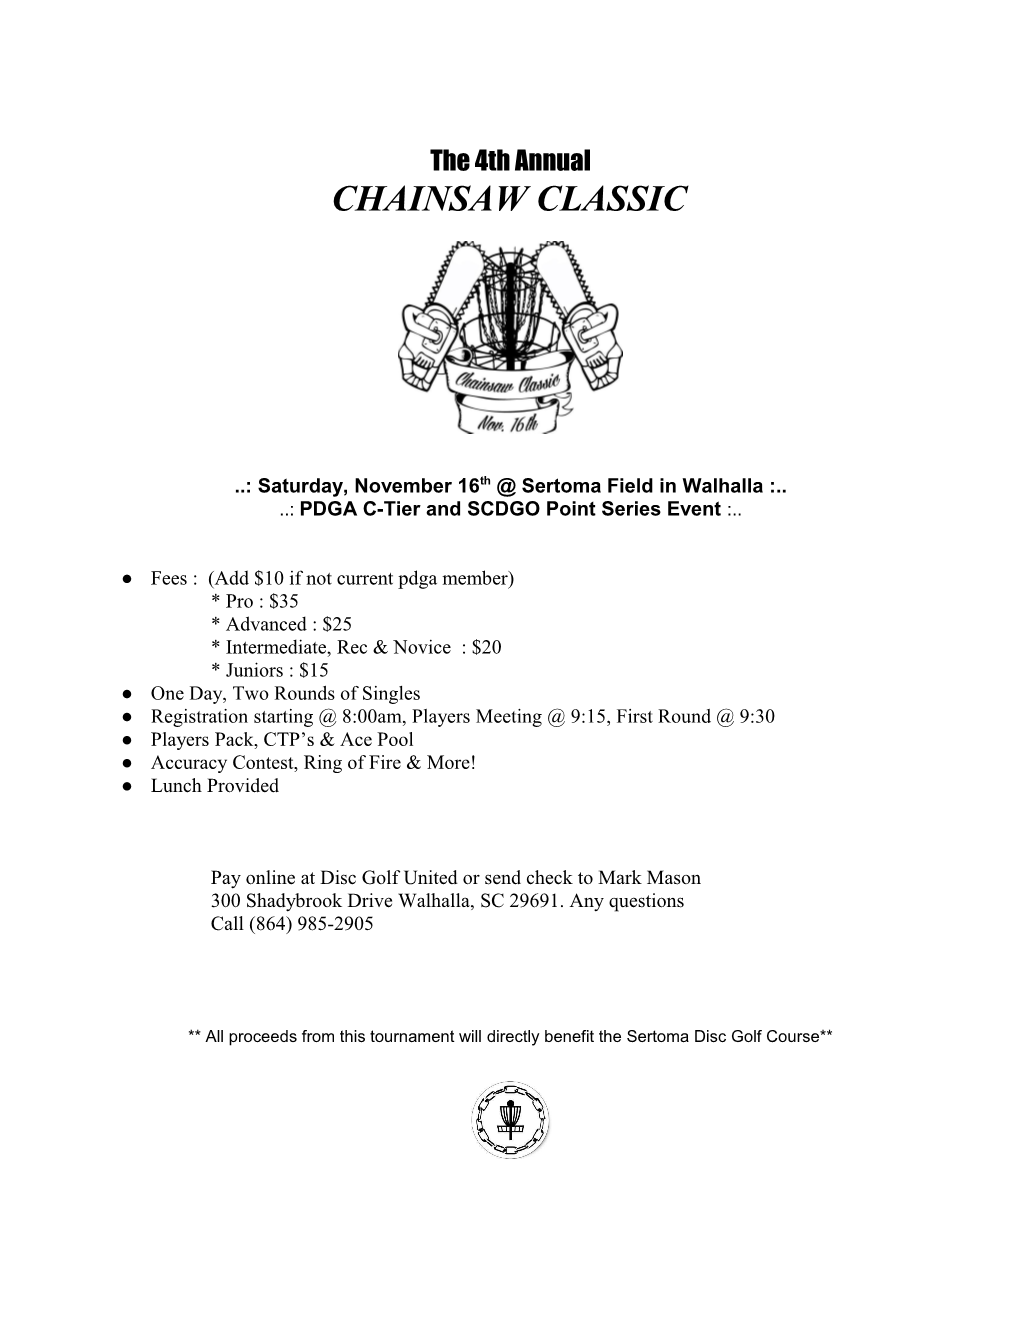 Chainsaw Classic Flyer